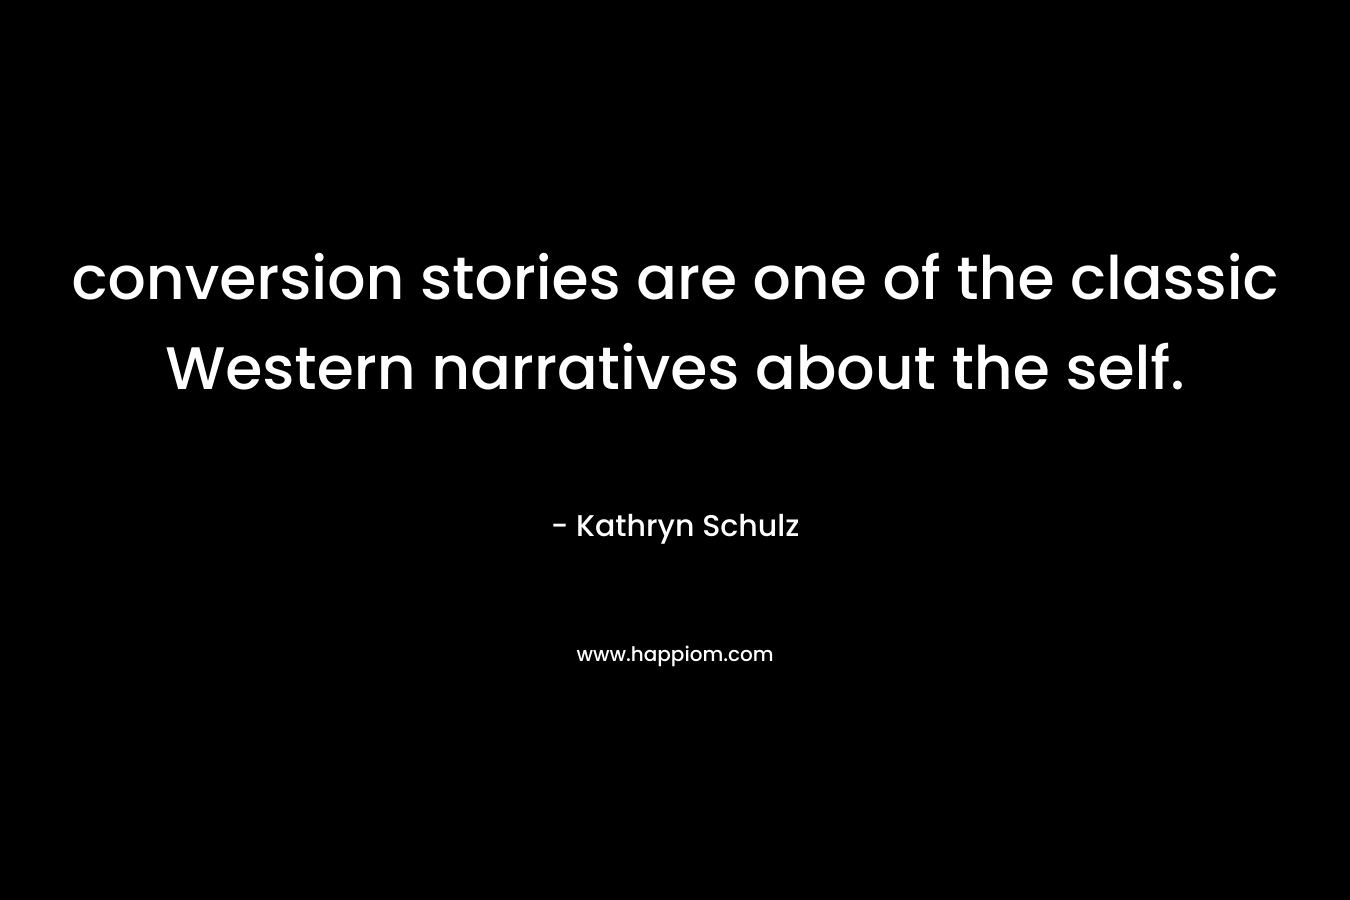 conversion stories are one of the classic Western narratives about the self. – Kathryn Schulz